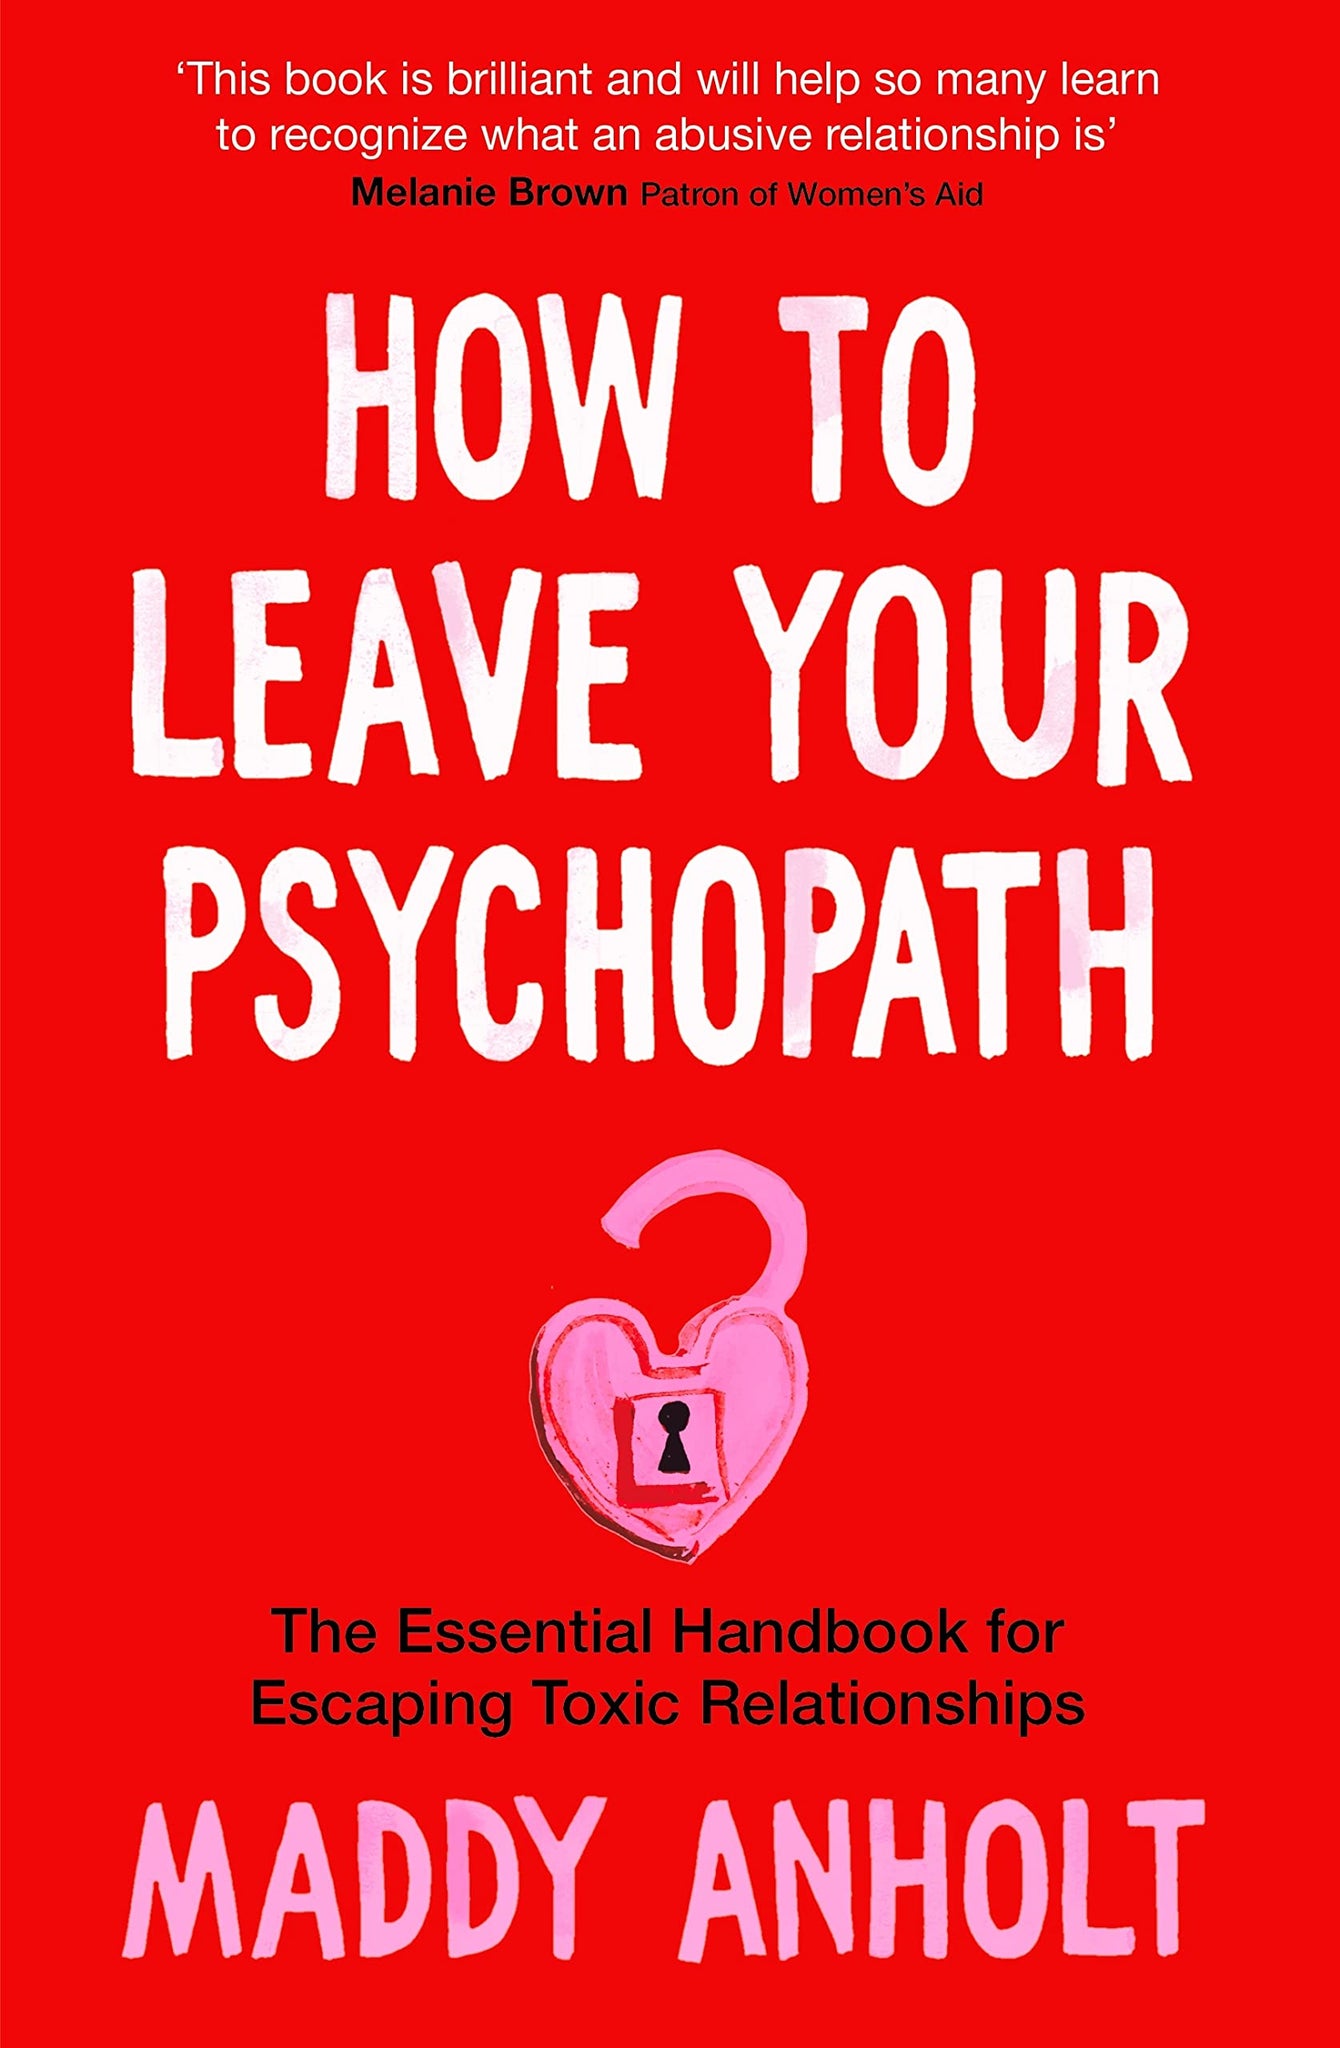 How to Leave Your Psychopath: The Essential Handbook for Escaping Toxic Relationships by Maddy Anholt